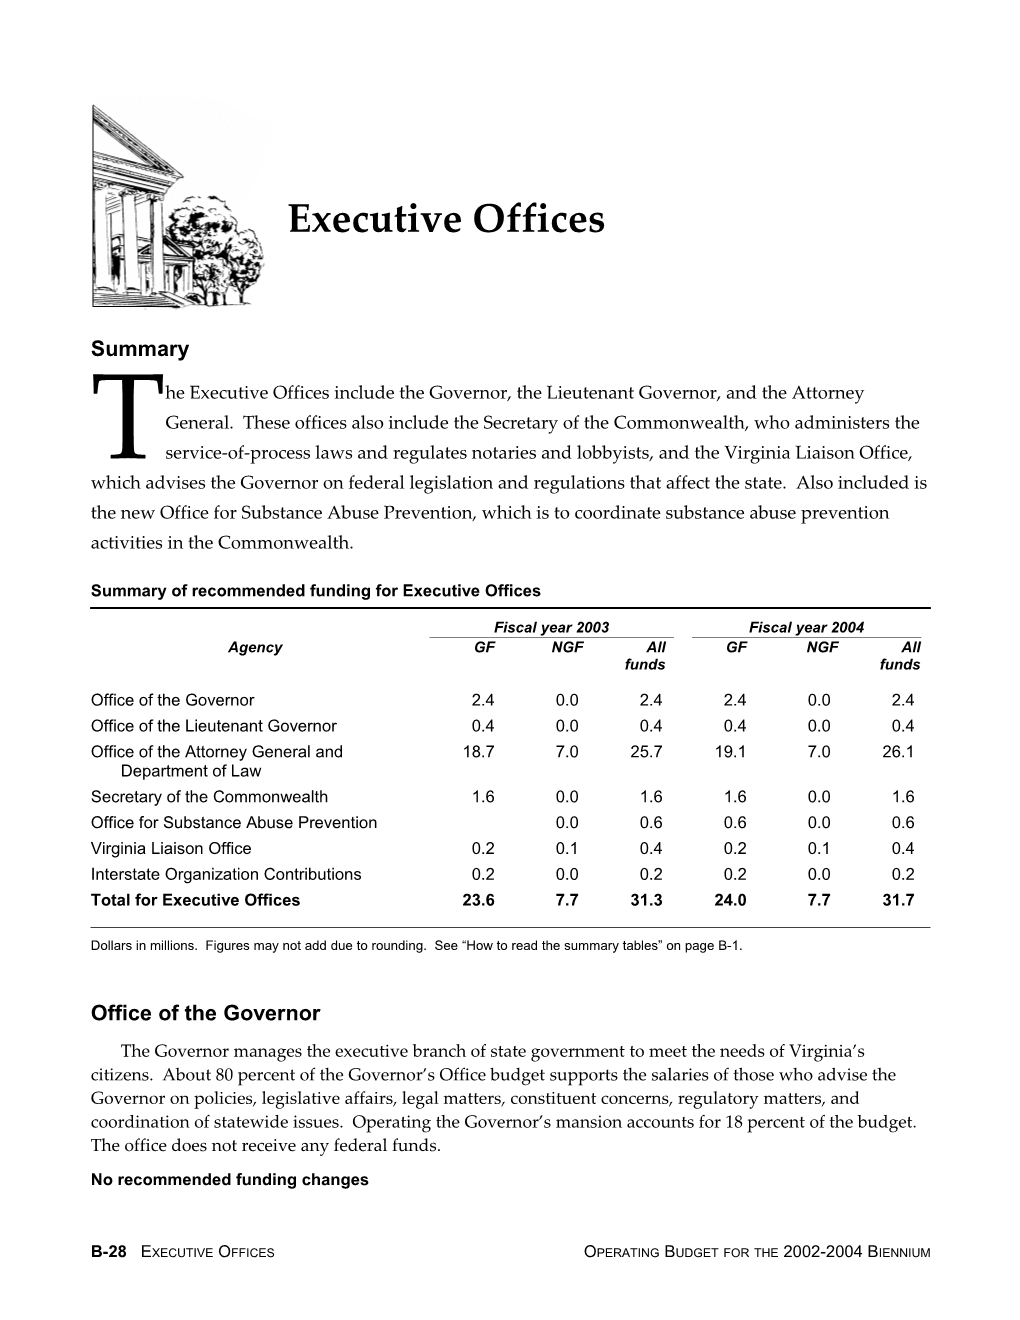 Summary of Recommended Funding for Executive Offices